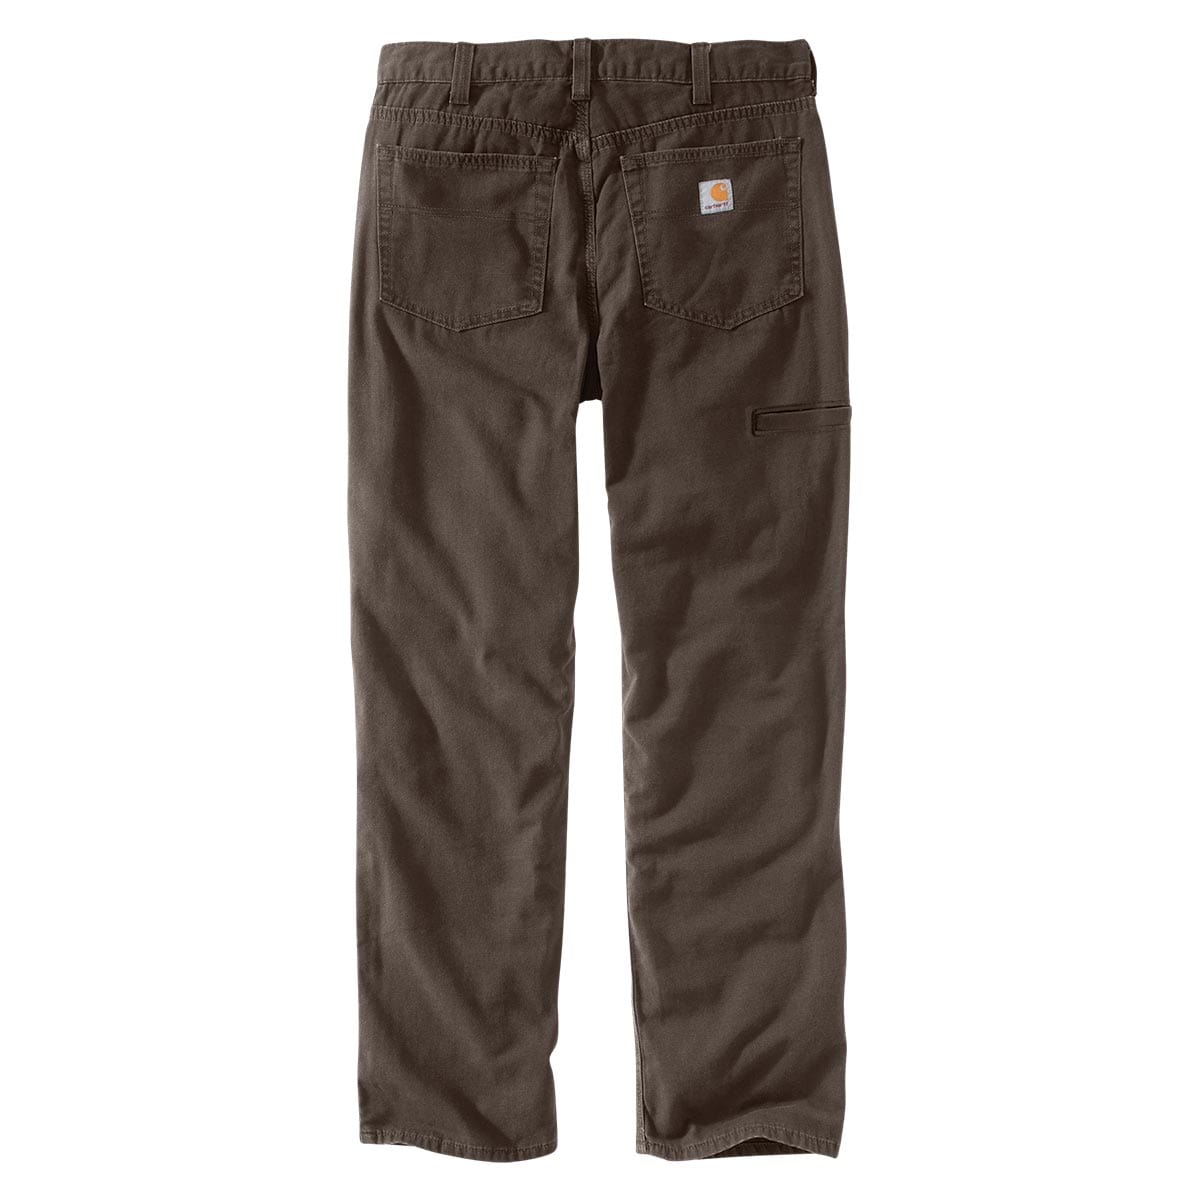 Men's 44 in. x 34 in. Hickory Cotton/Spandex Rugged Flex Rigby 5-Pocket Pant